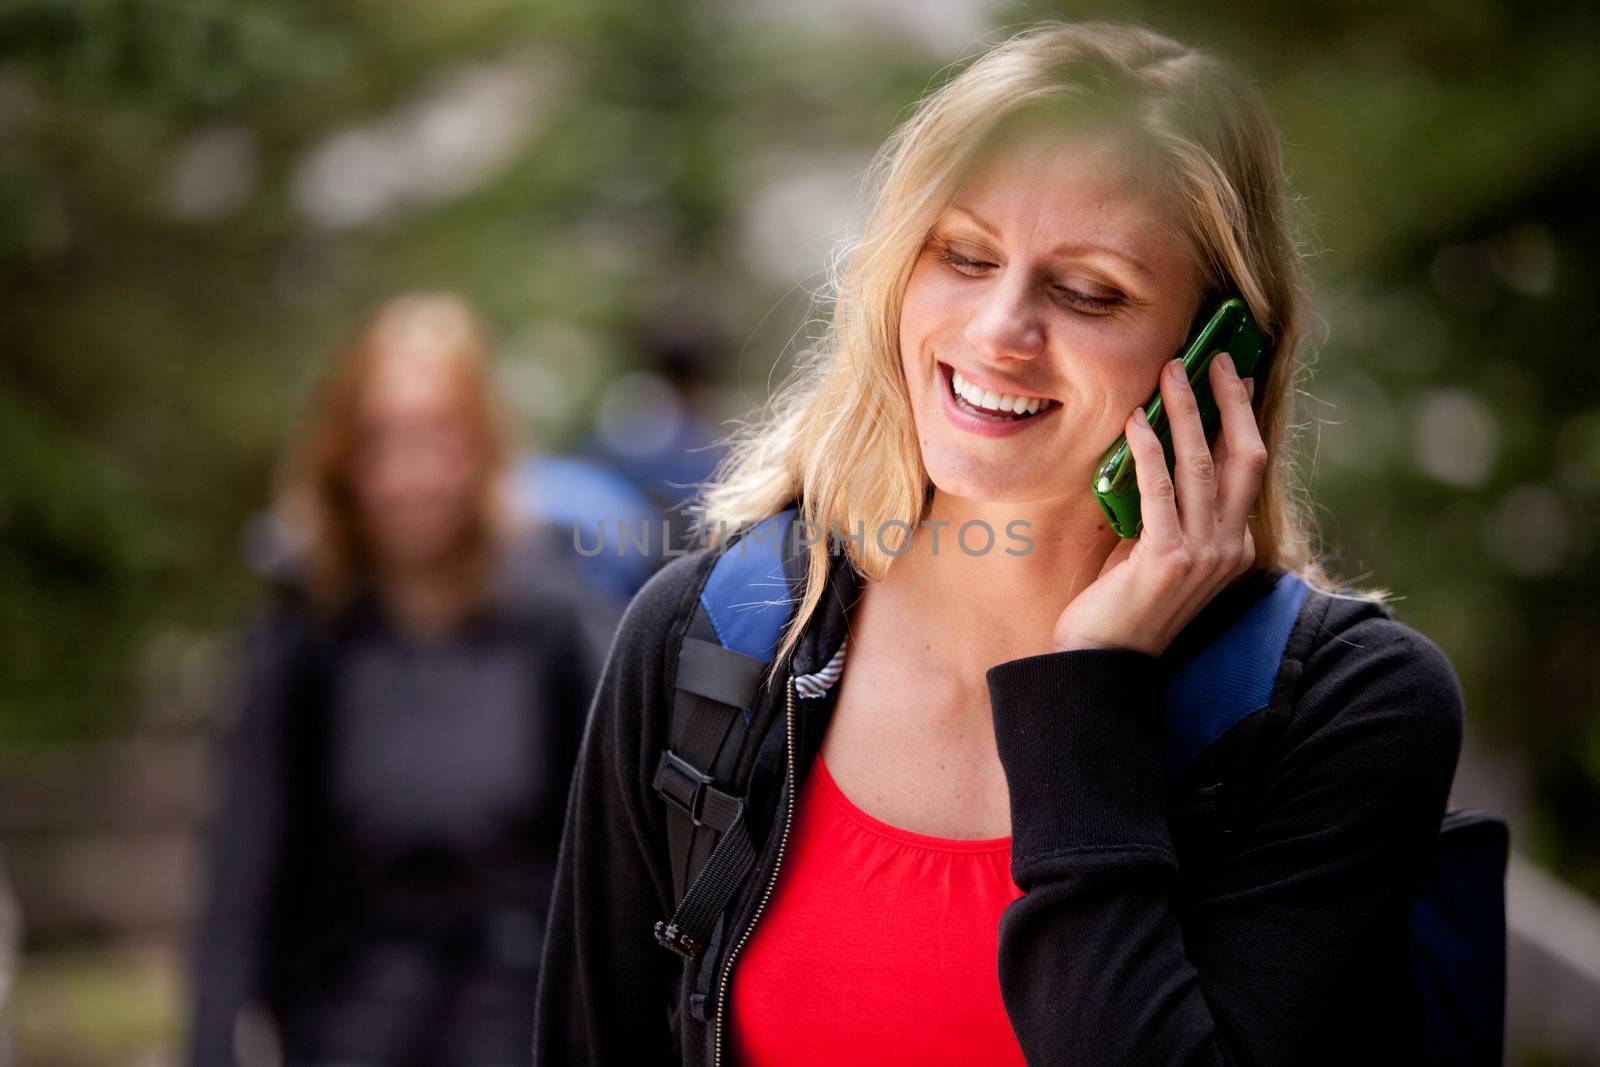 A happy woman talking on a cell phone outdoors